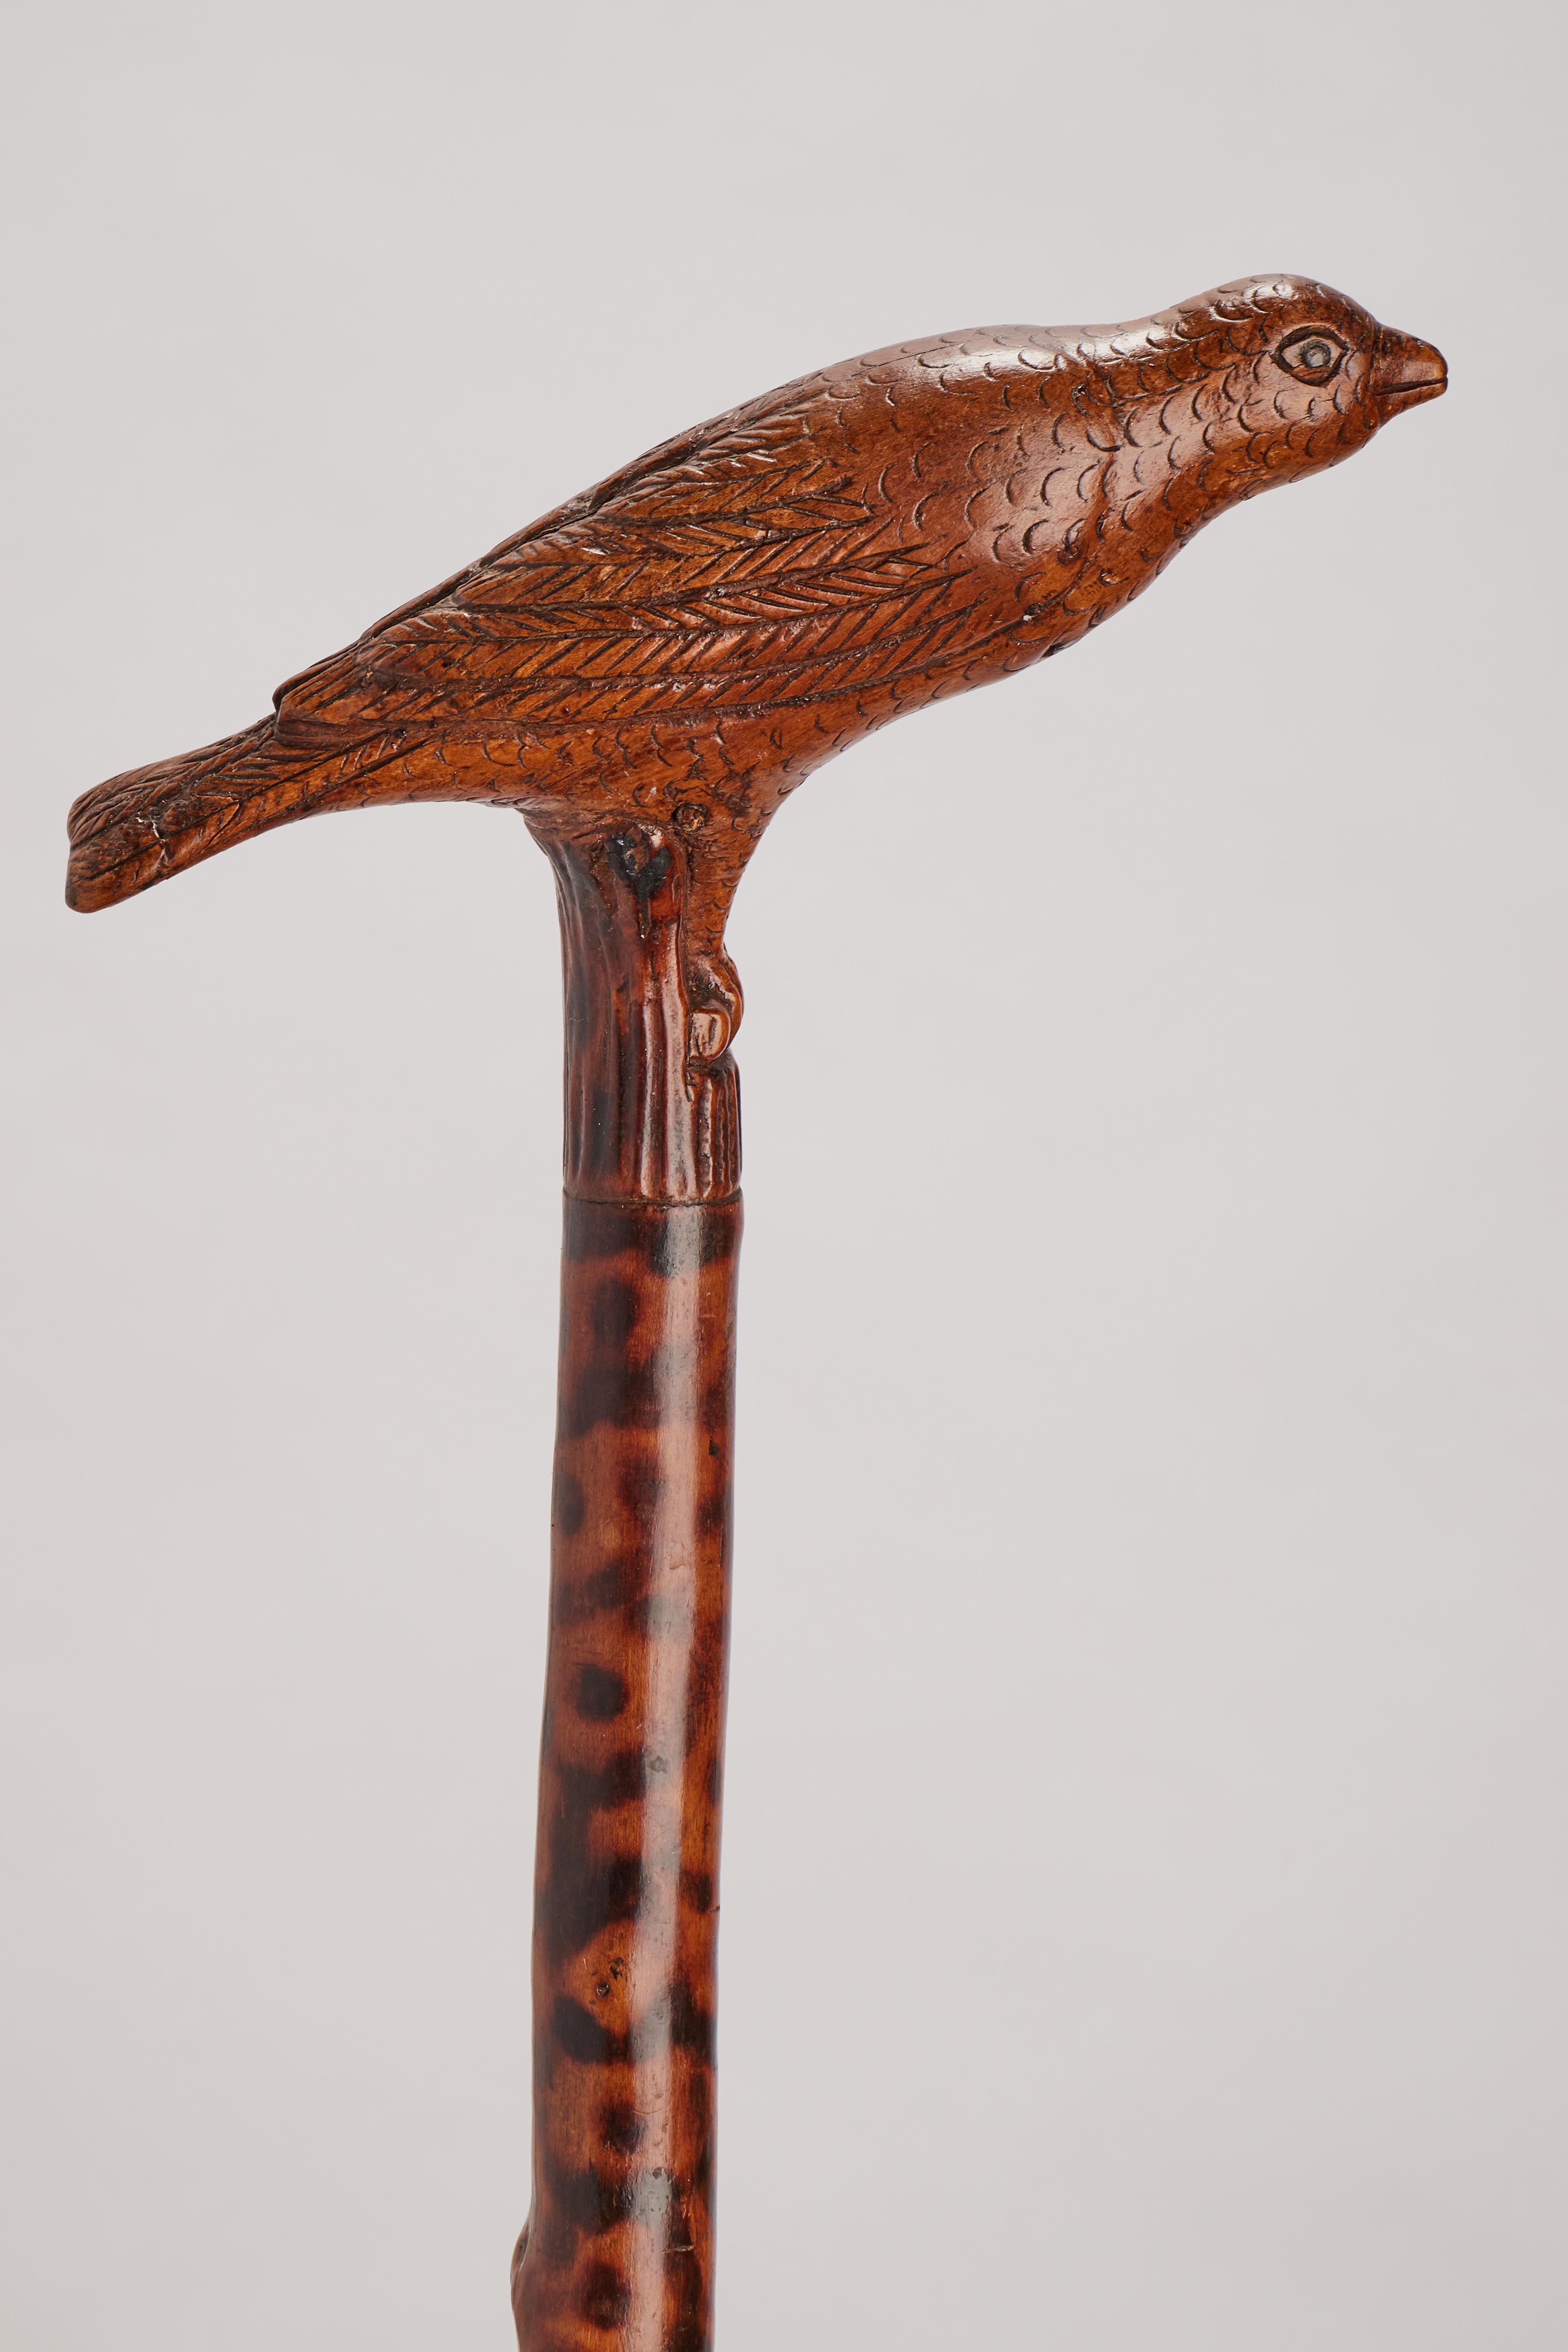 Folk Art walking stick: one piece of fruitwood branch follows the natural growth. Sculpted handle depicting a bird flamed shaft decoration. Metal ferrule. Italy, circa 1870.